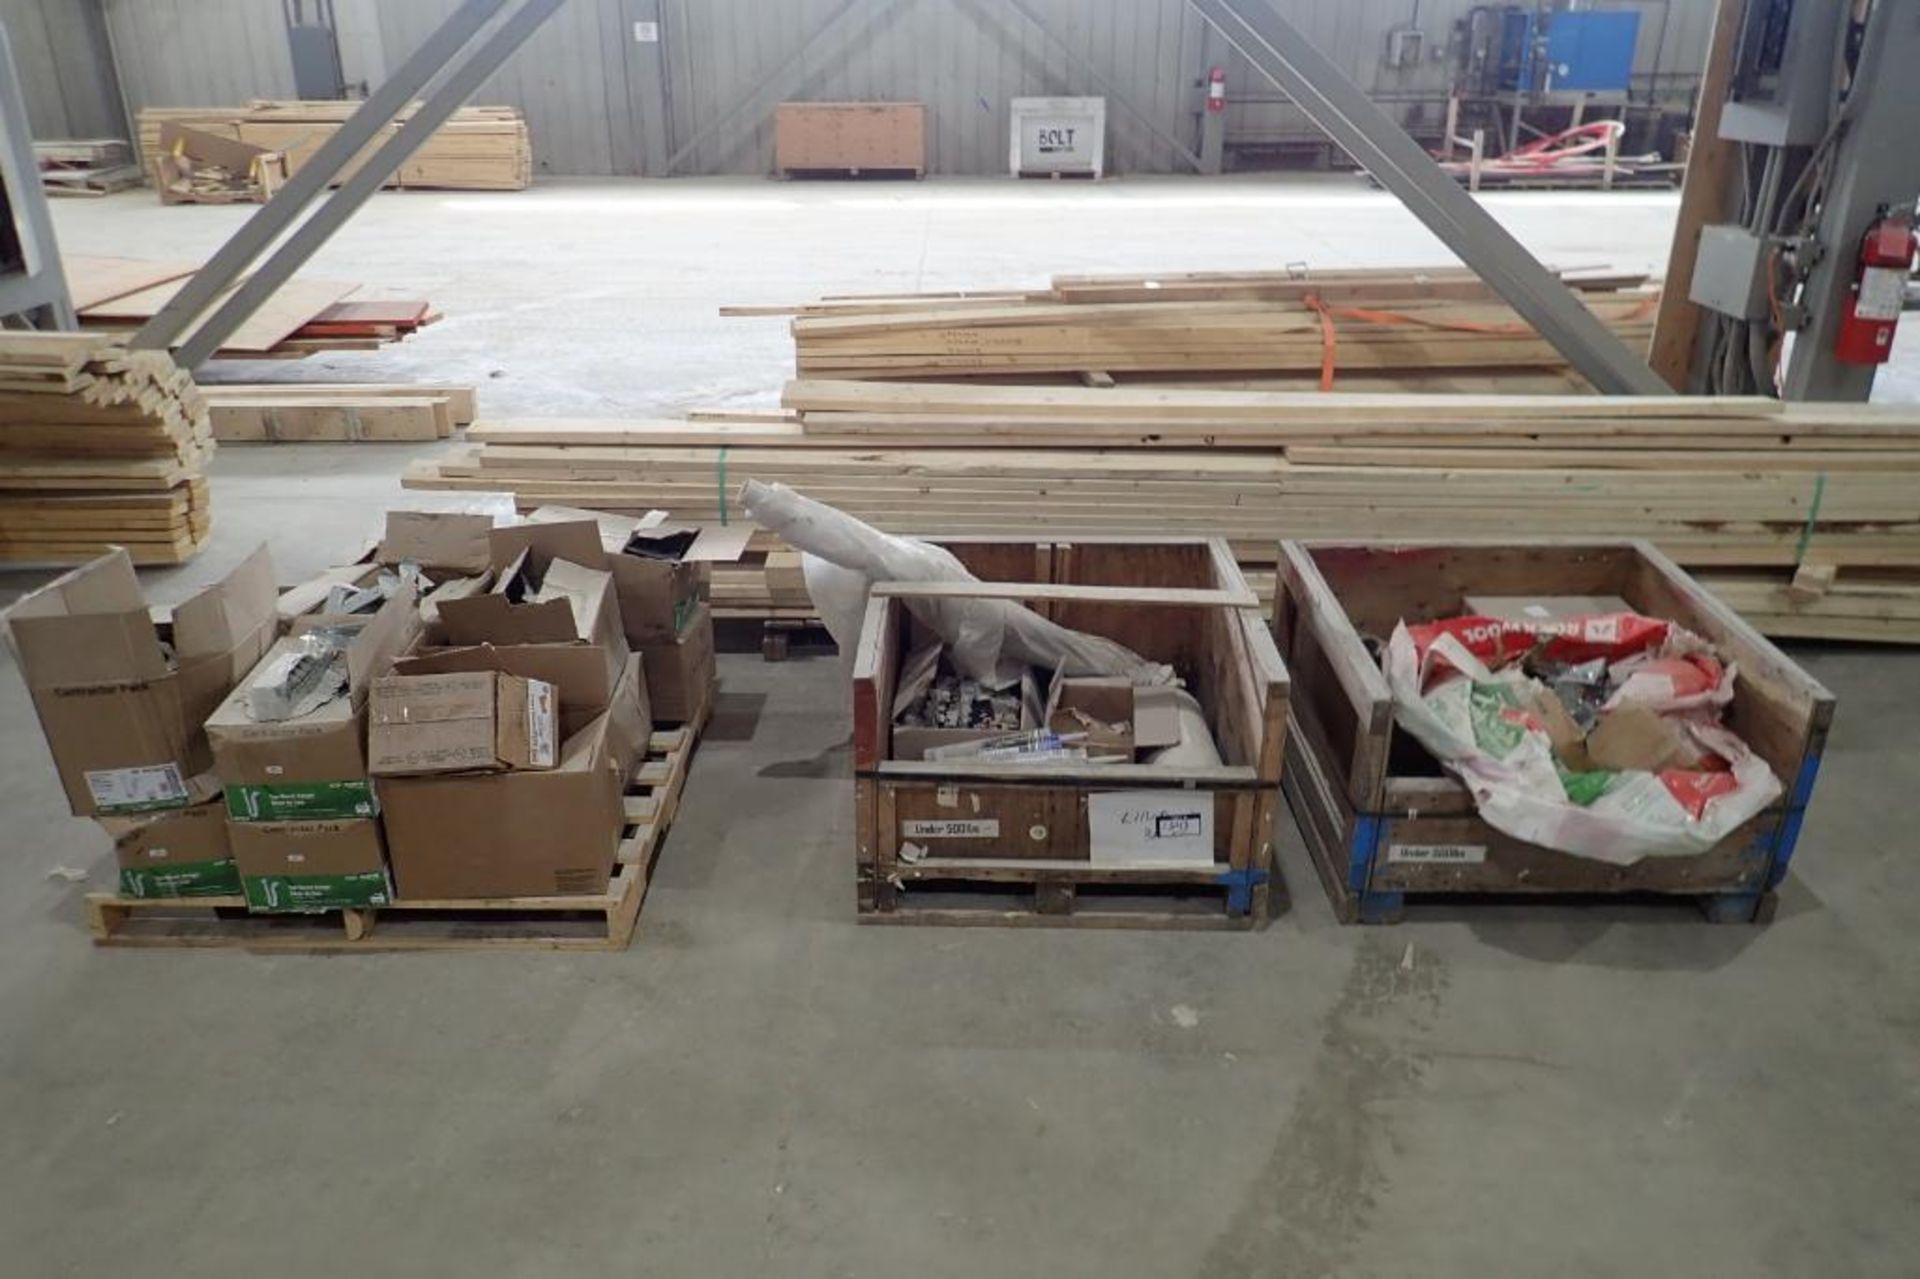 Lot of 2 Crates and 1 Pallet Asst. Joist Hangers, Construction Adhesive, etc. - Image 2 of 5